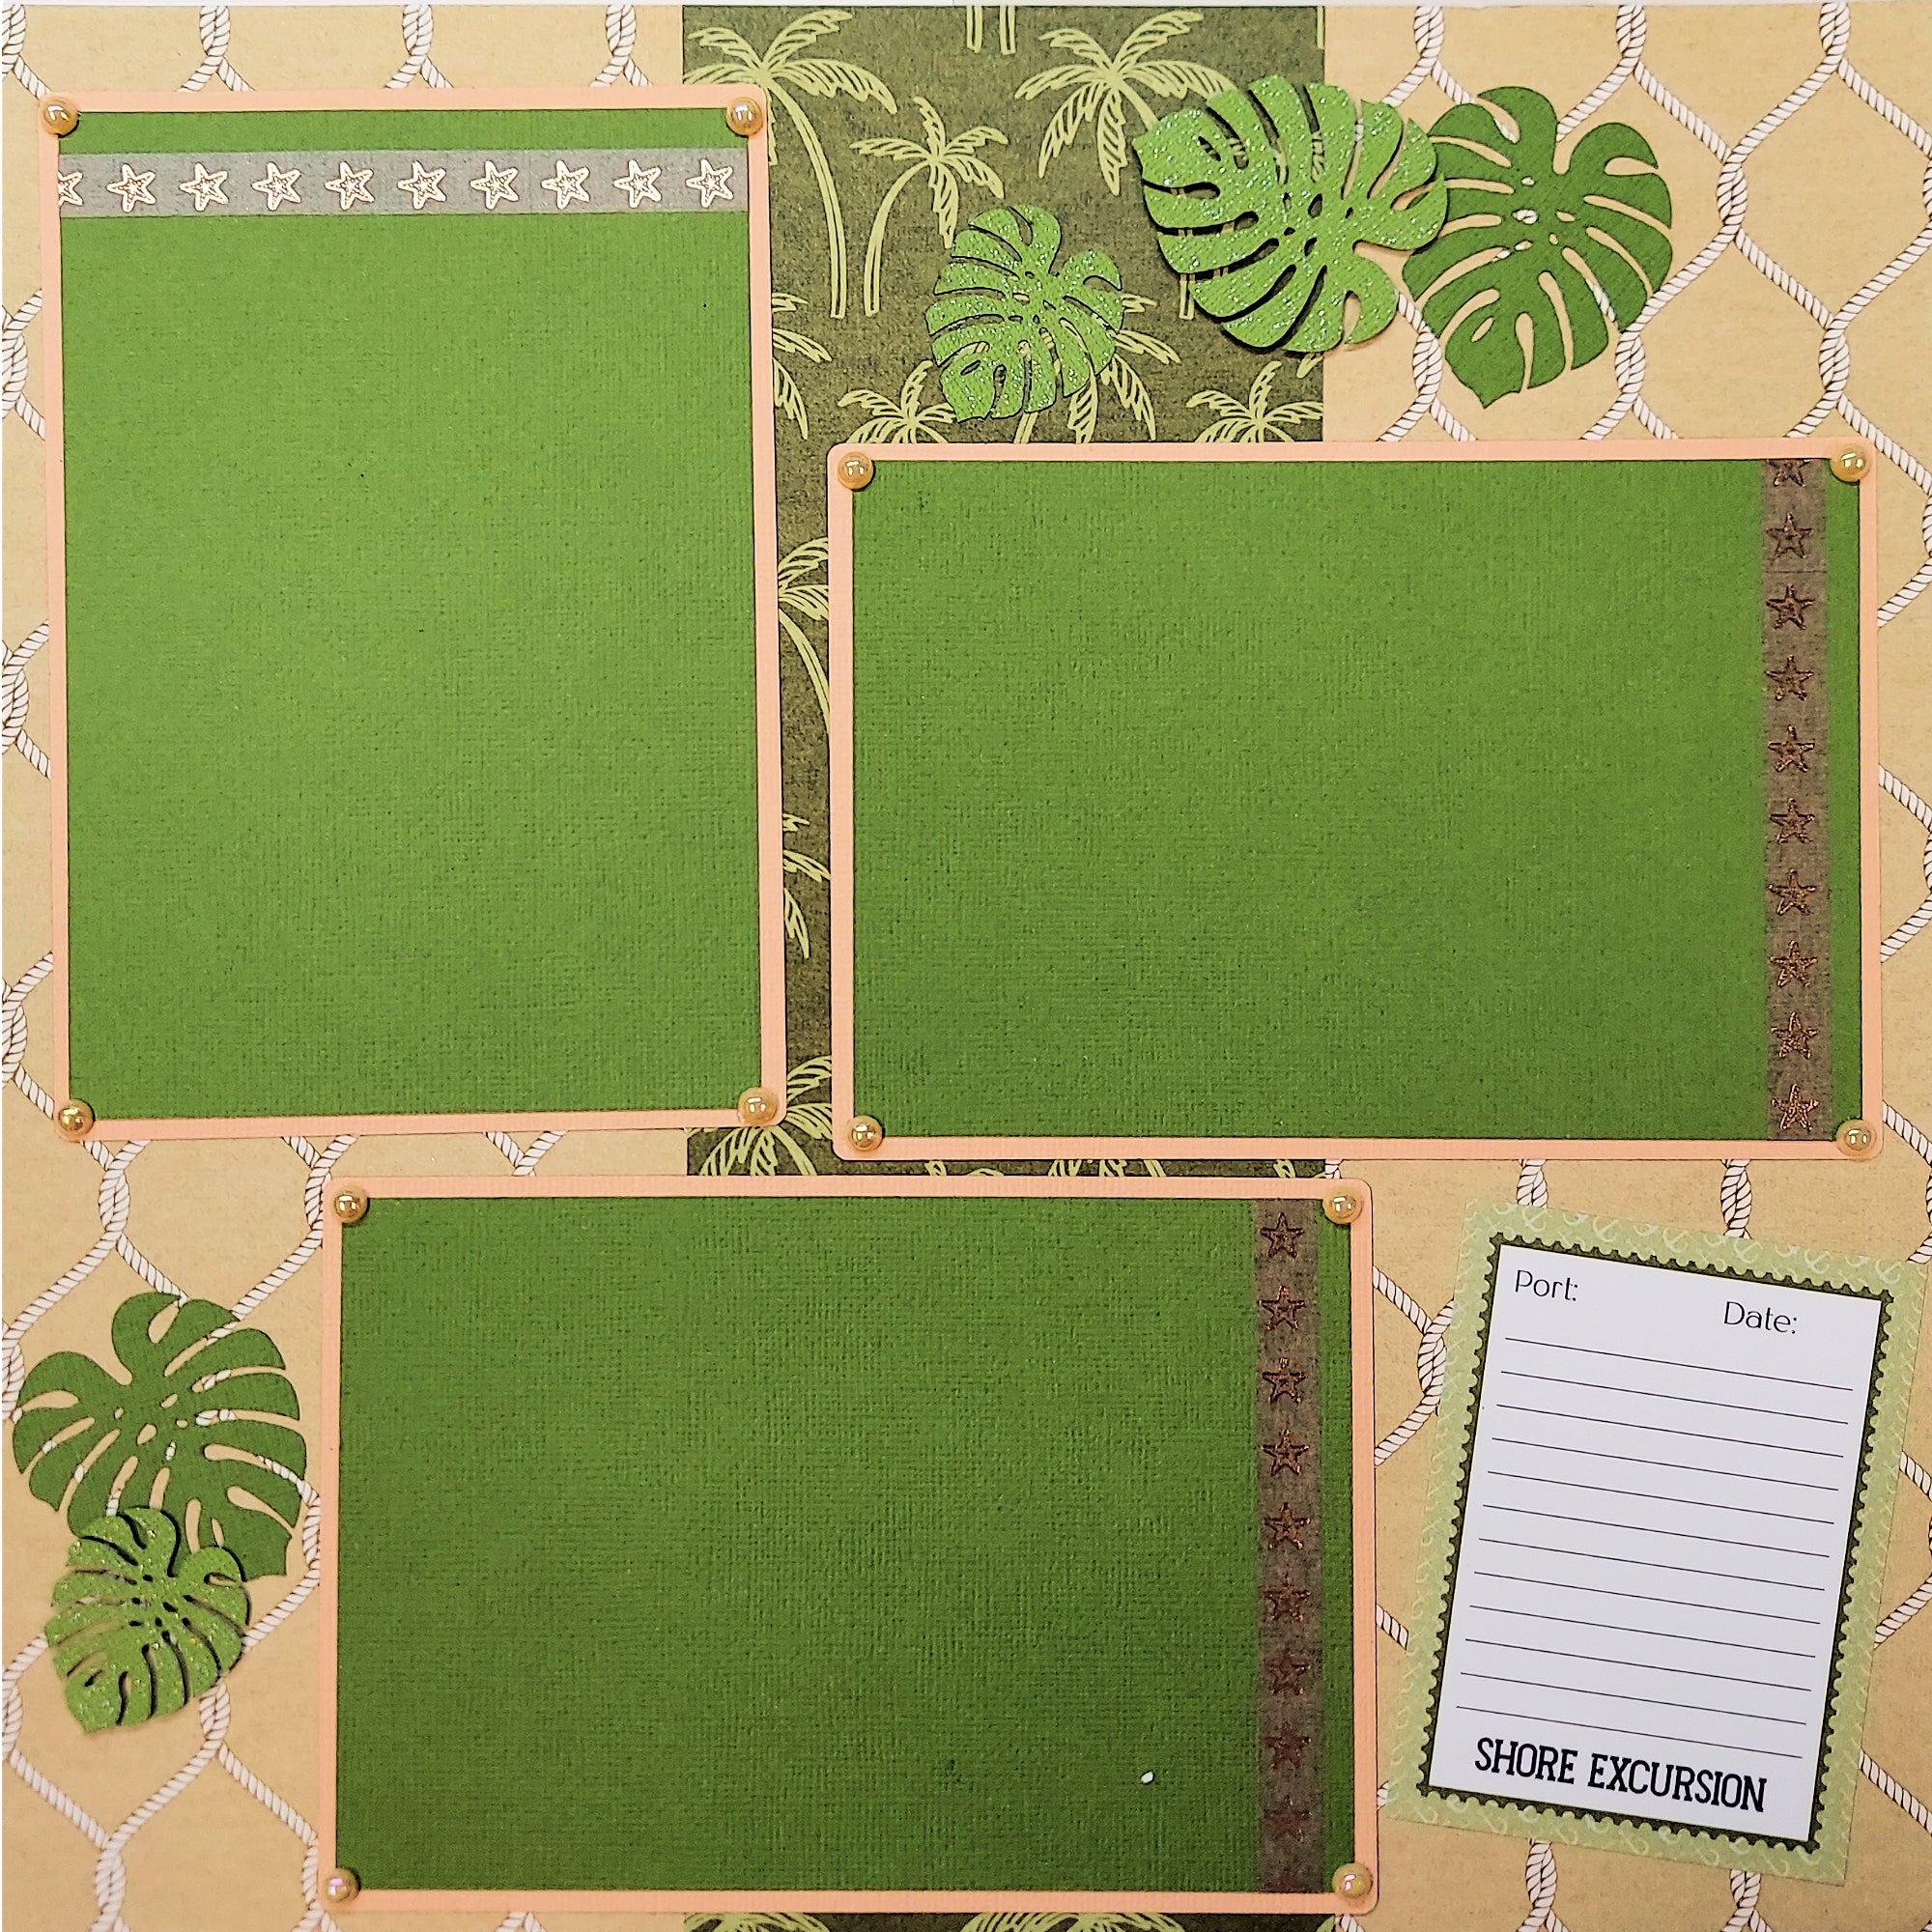 Ahoy! Paradise (2) - 12 x 12 Pages, Fully-Assembled & Hand-Crafted 3D Scrapbook Premade by SSC Designs